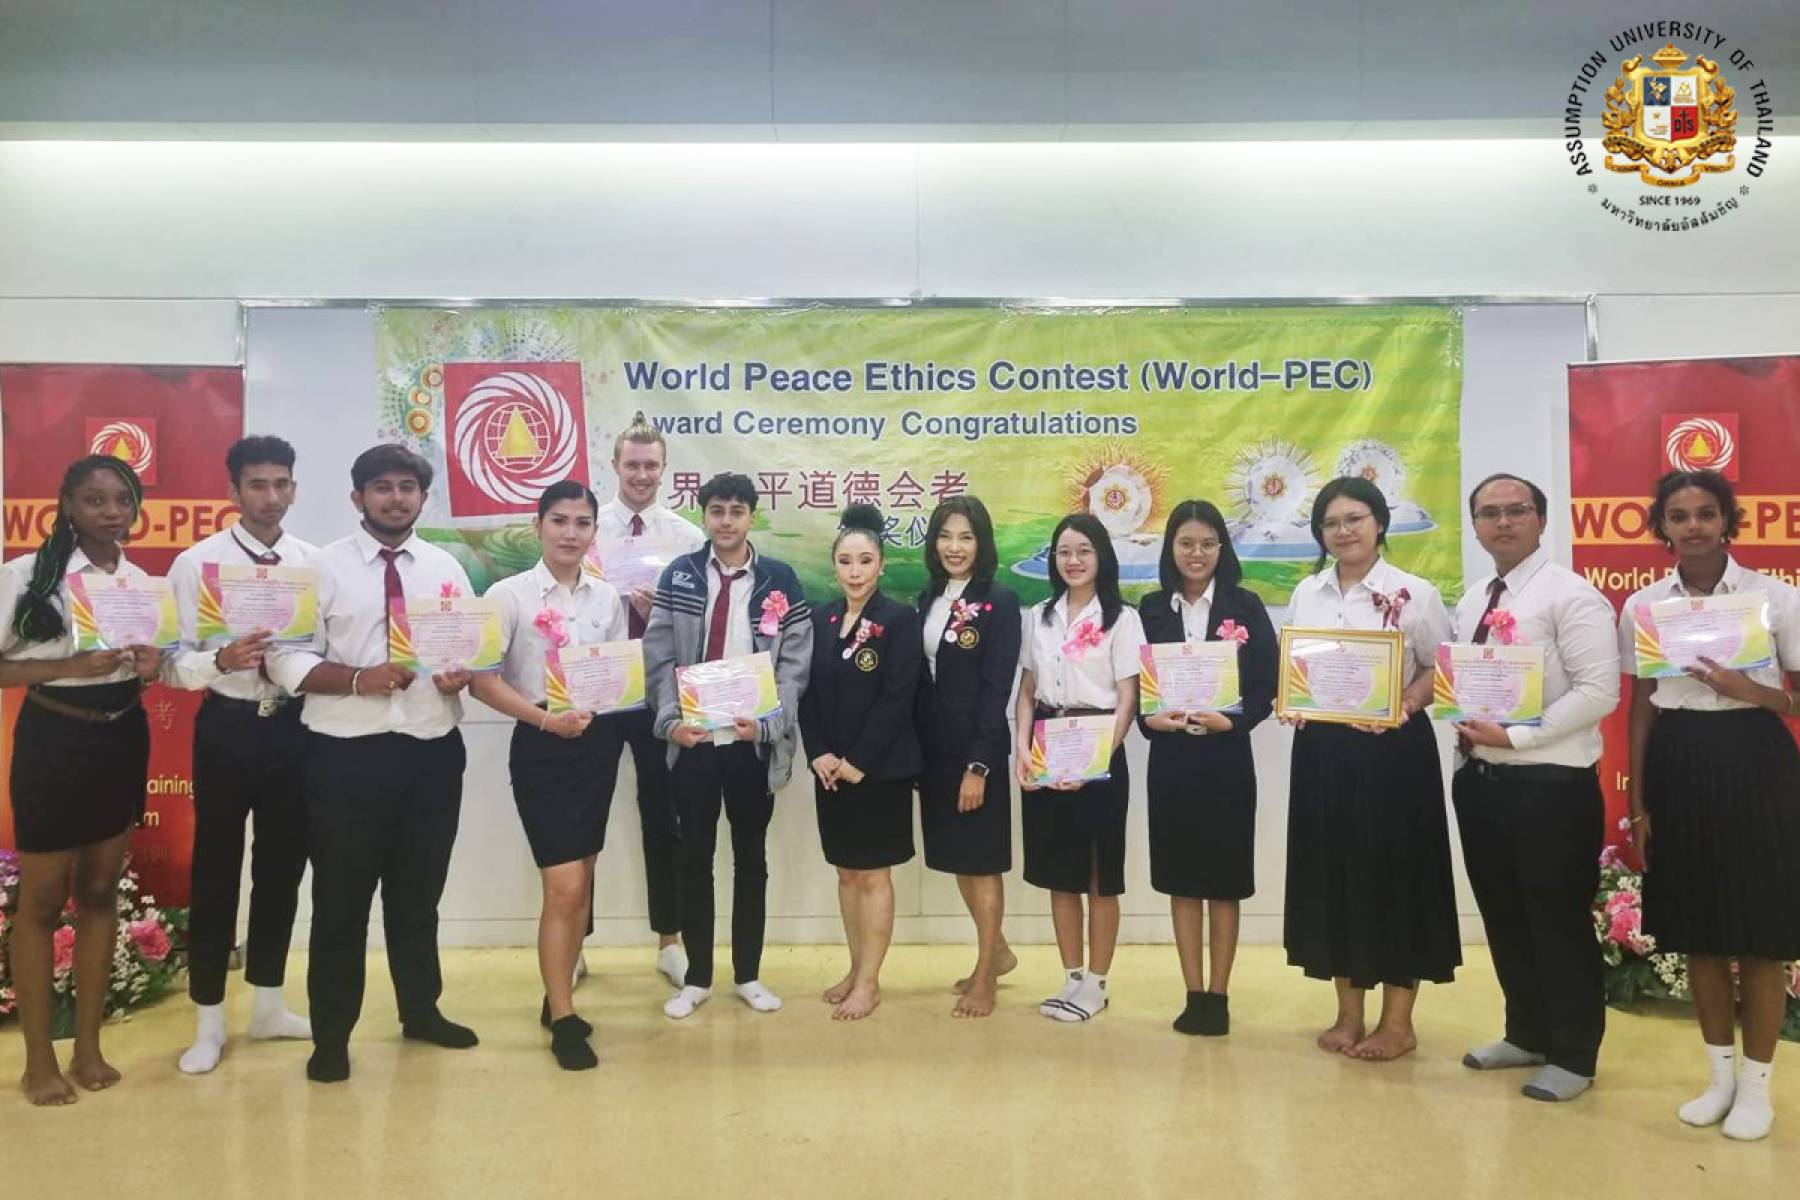 AU Ethics Reaped All Top Prizes at the World Peace Ethics Contest